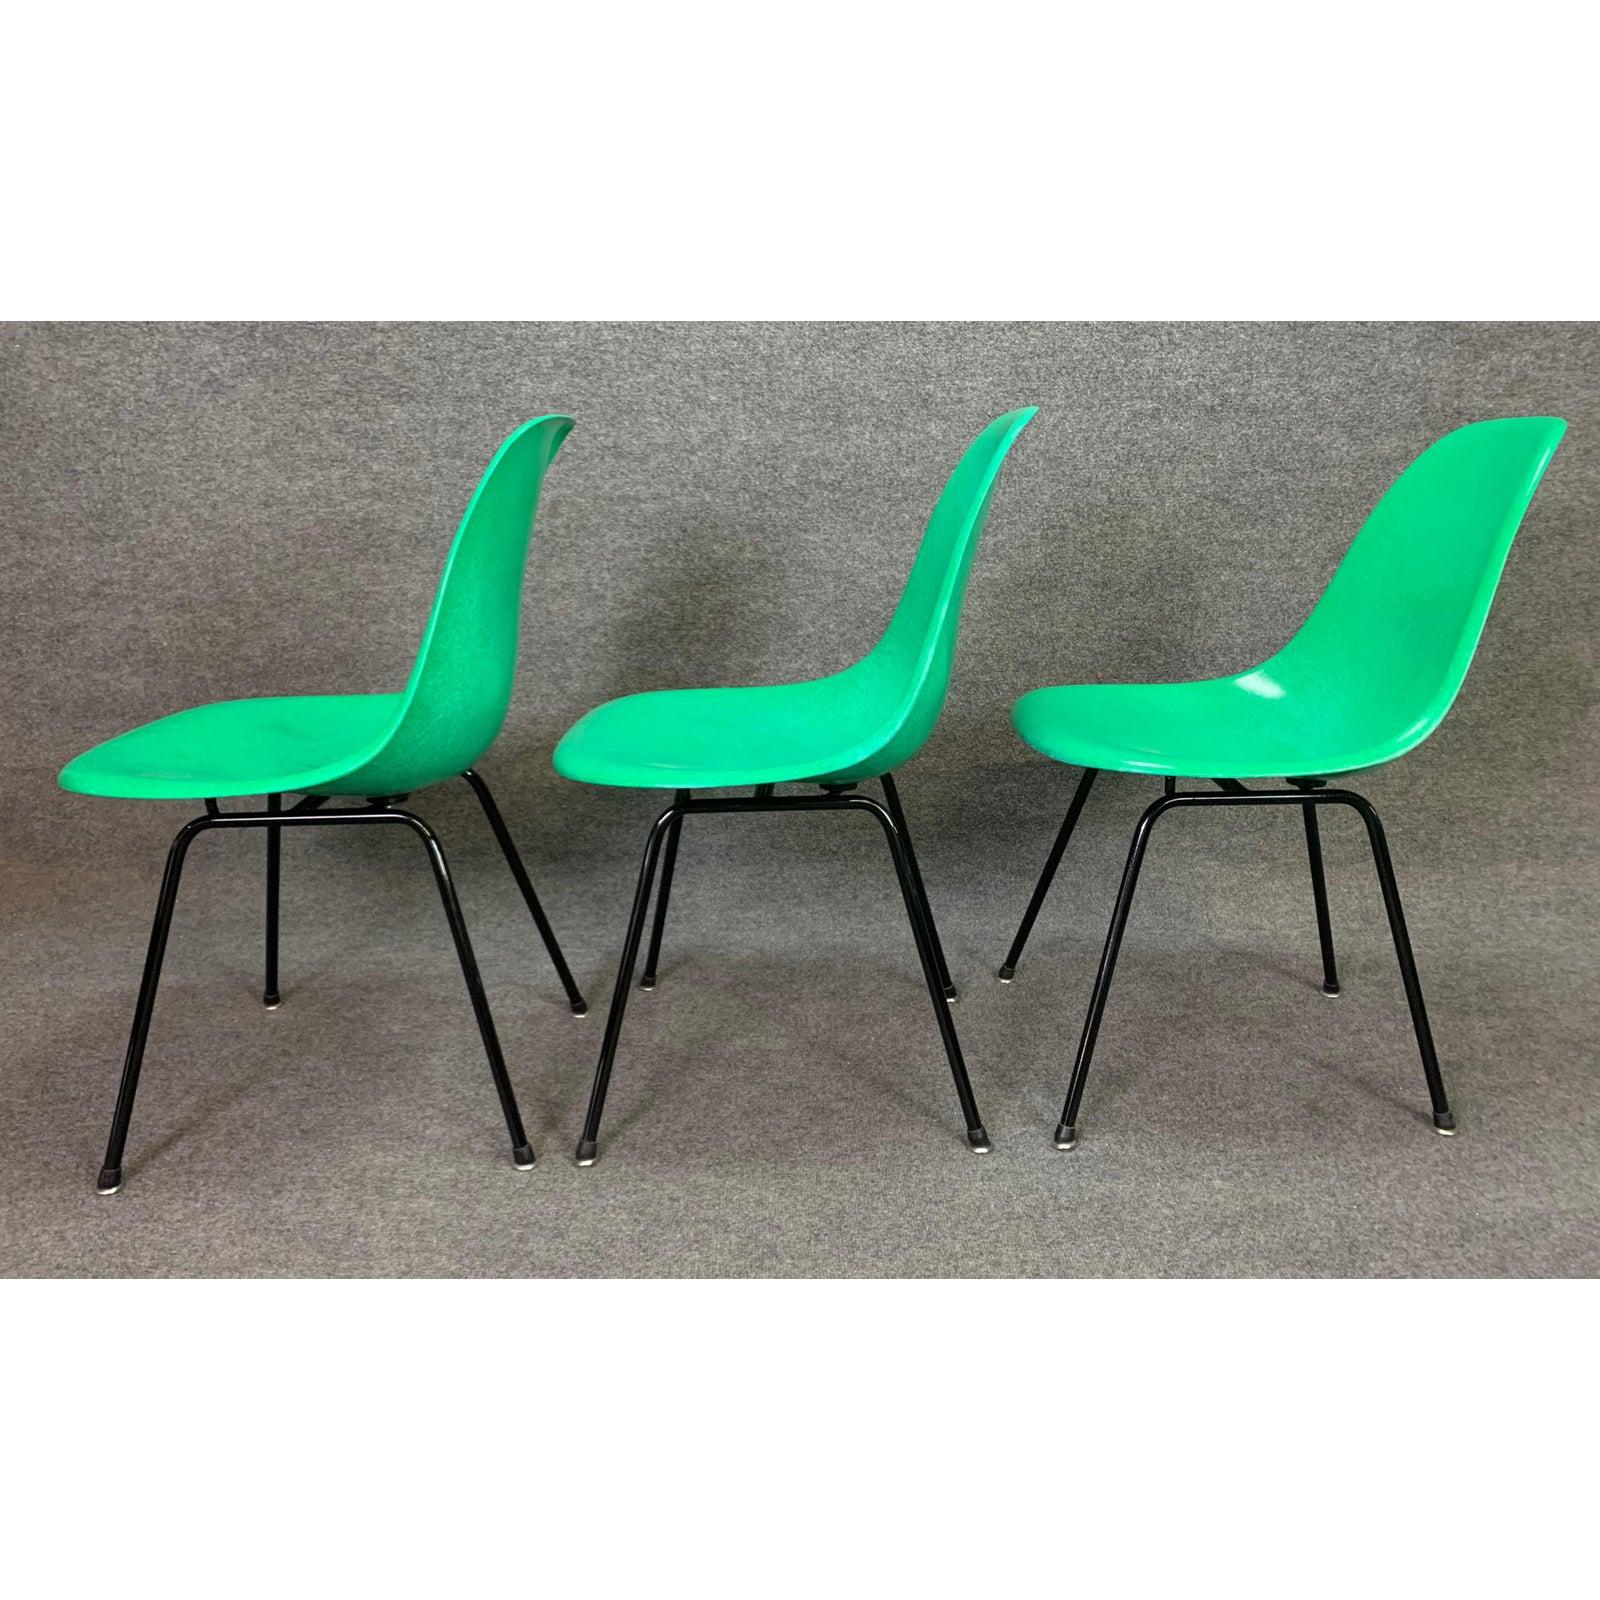 Set of 6 Midcentury DSX Fiberglass Chairs by Charles Eames for Herman Miller 1